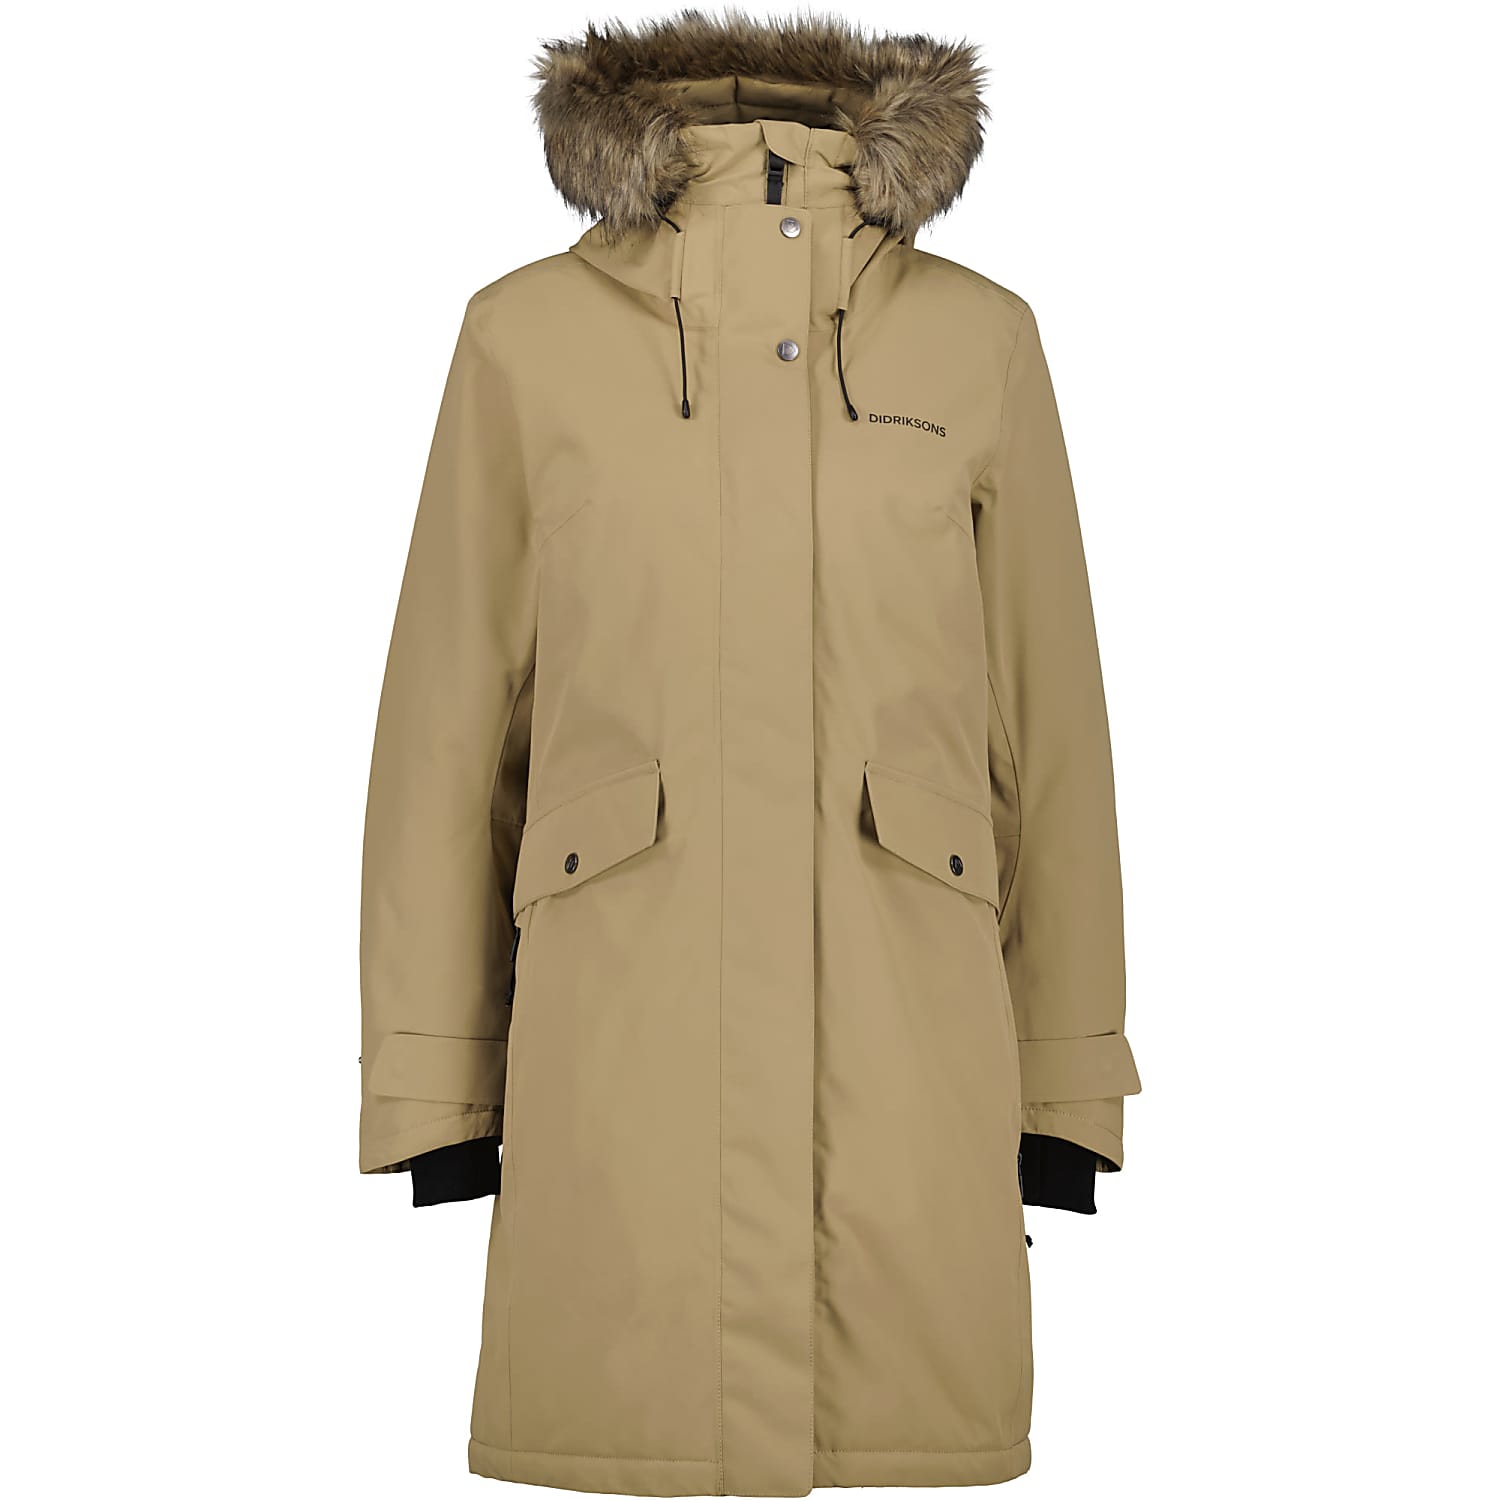 Didriksons W 3, and shipping - ERIKA cheap Wood PARKA Fast